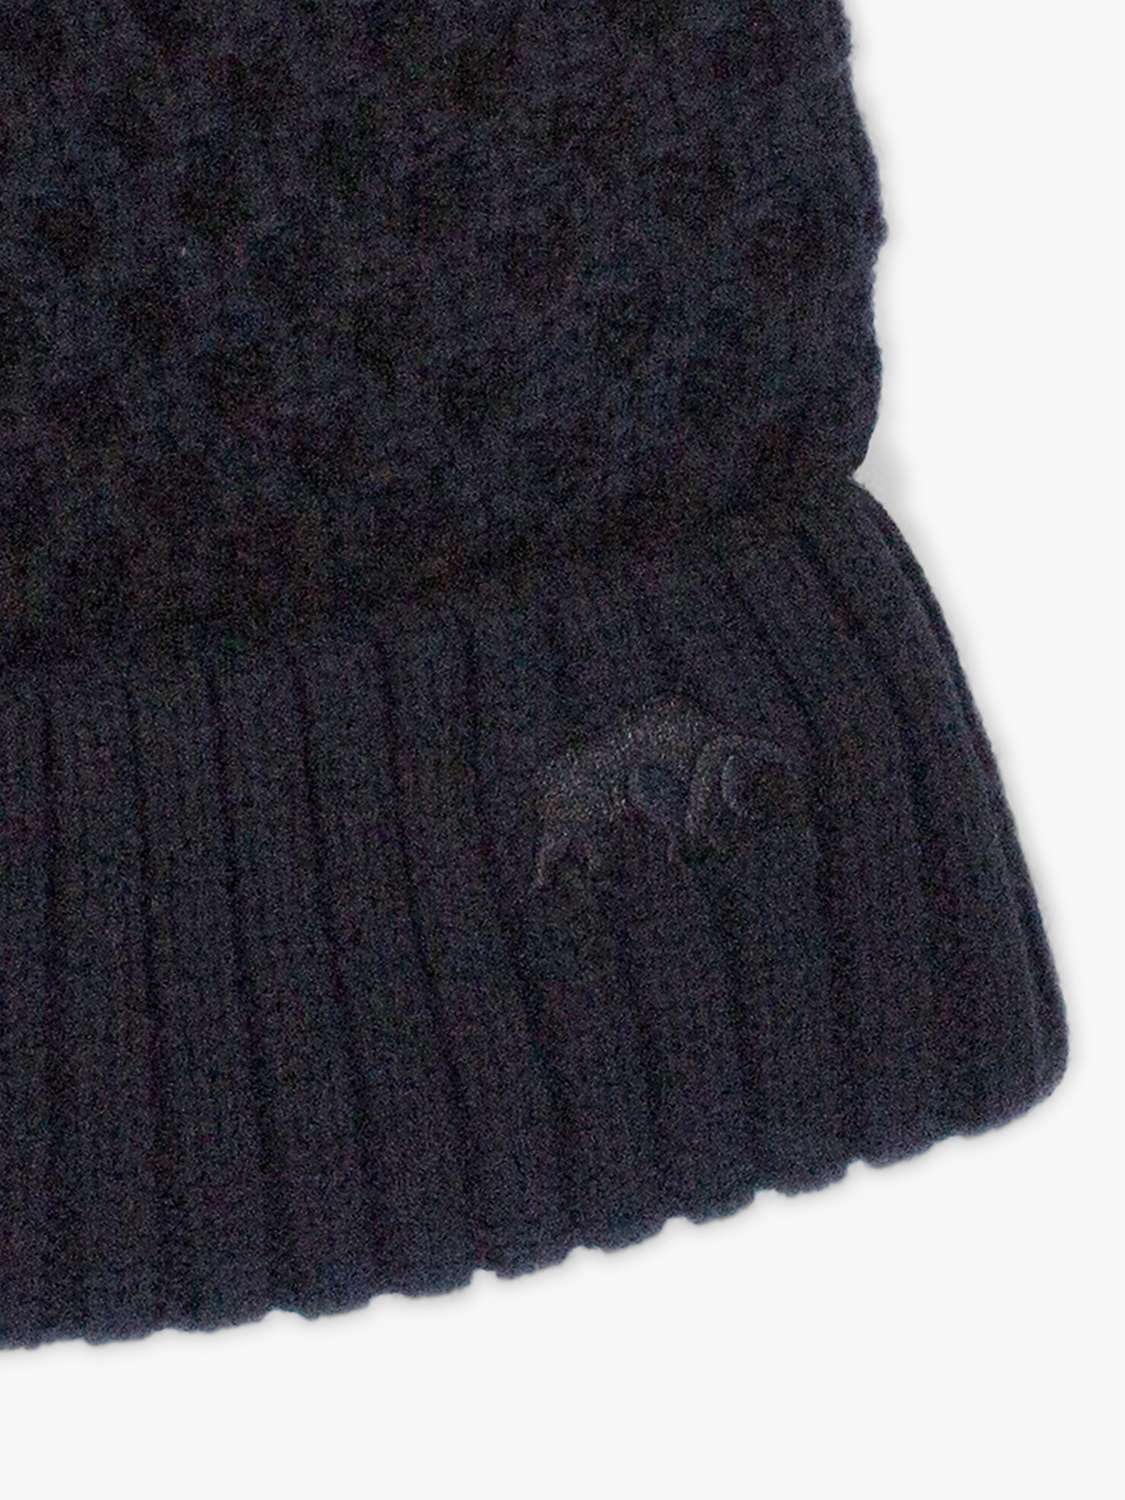 Buy Raging Bull Cable Knit Beanie Online at johnlewis.com